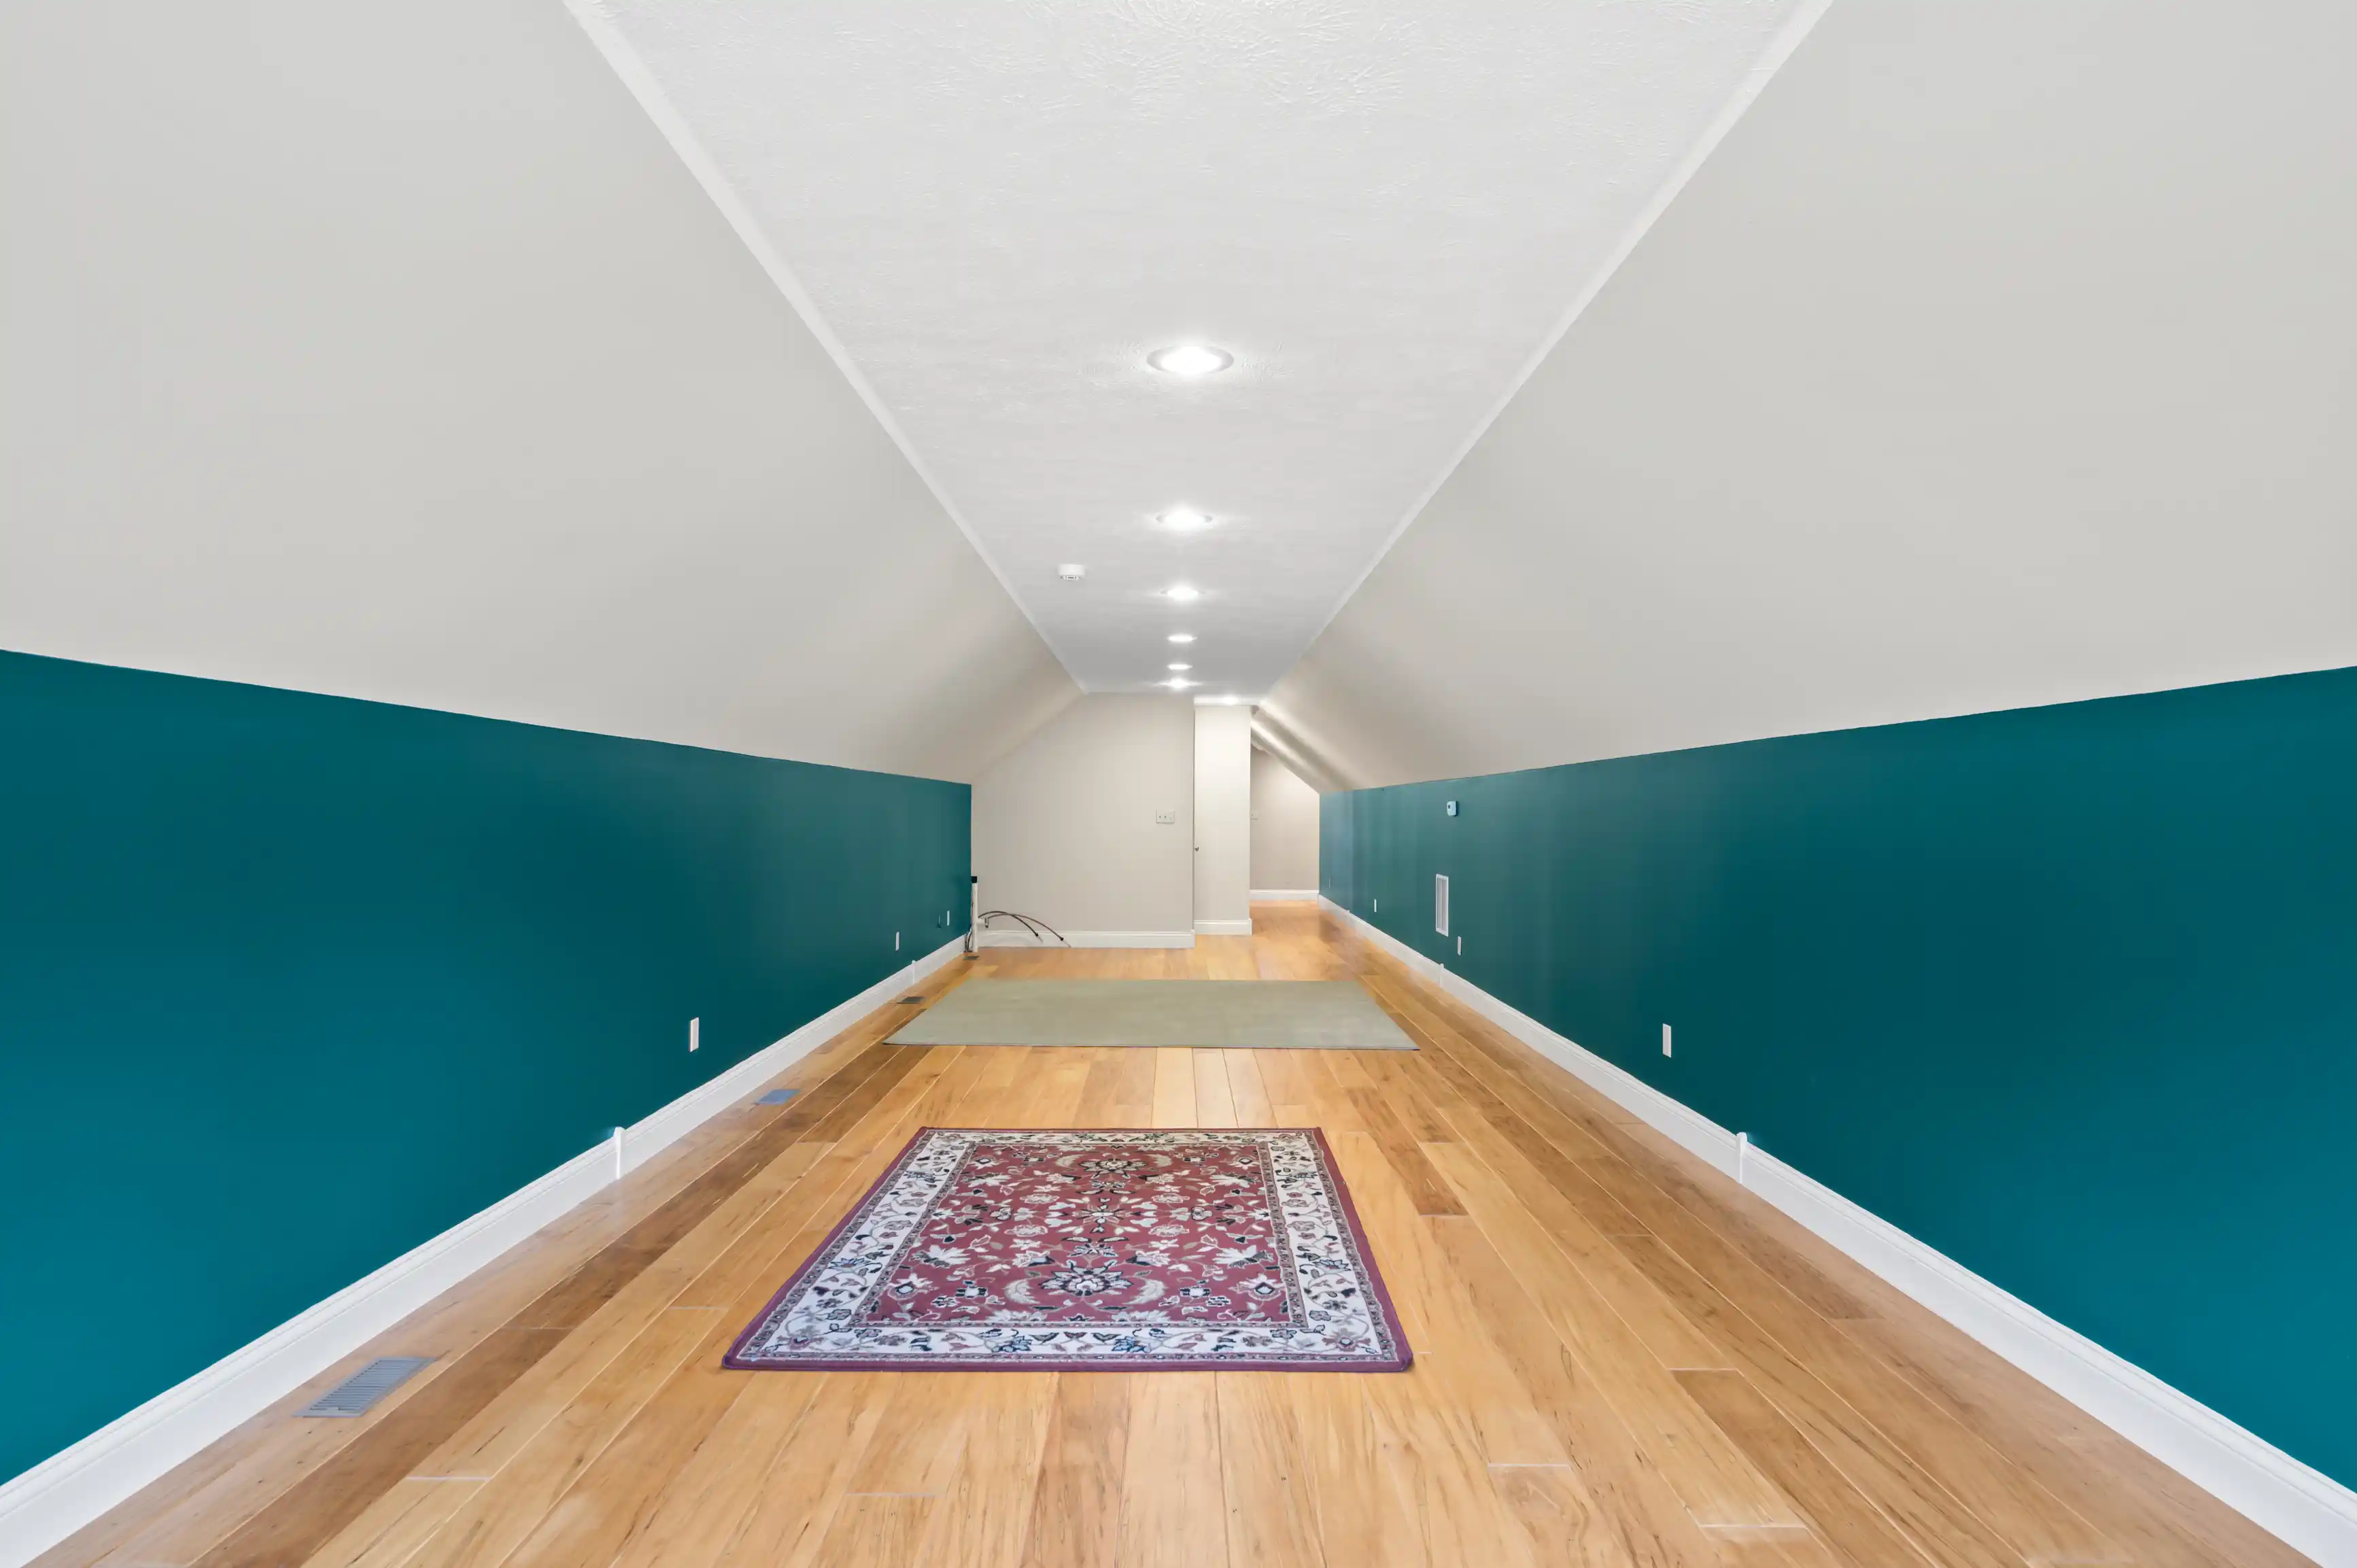 A long, narrow hallway with hardwood floors, white ceiling, and dark teal lower walls, featuring recessed lighting and a decorative red and blue rug.